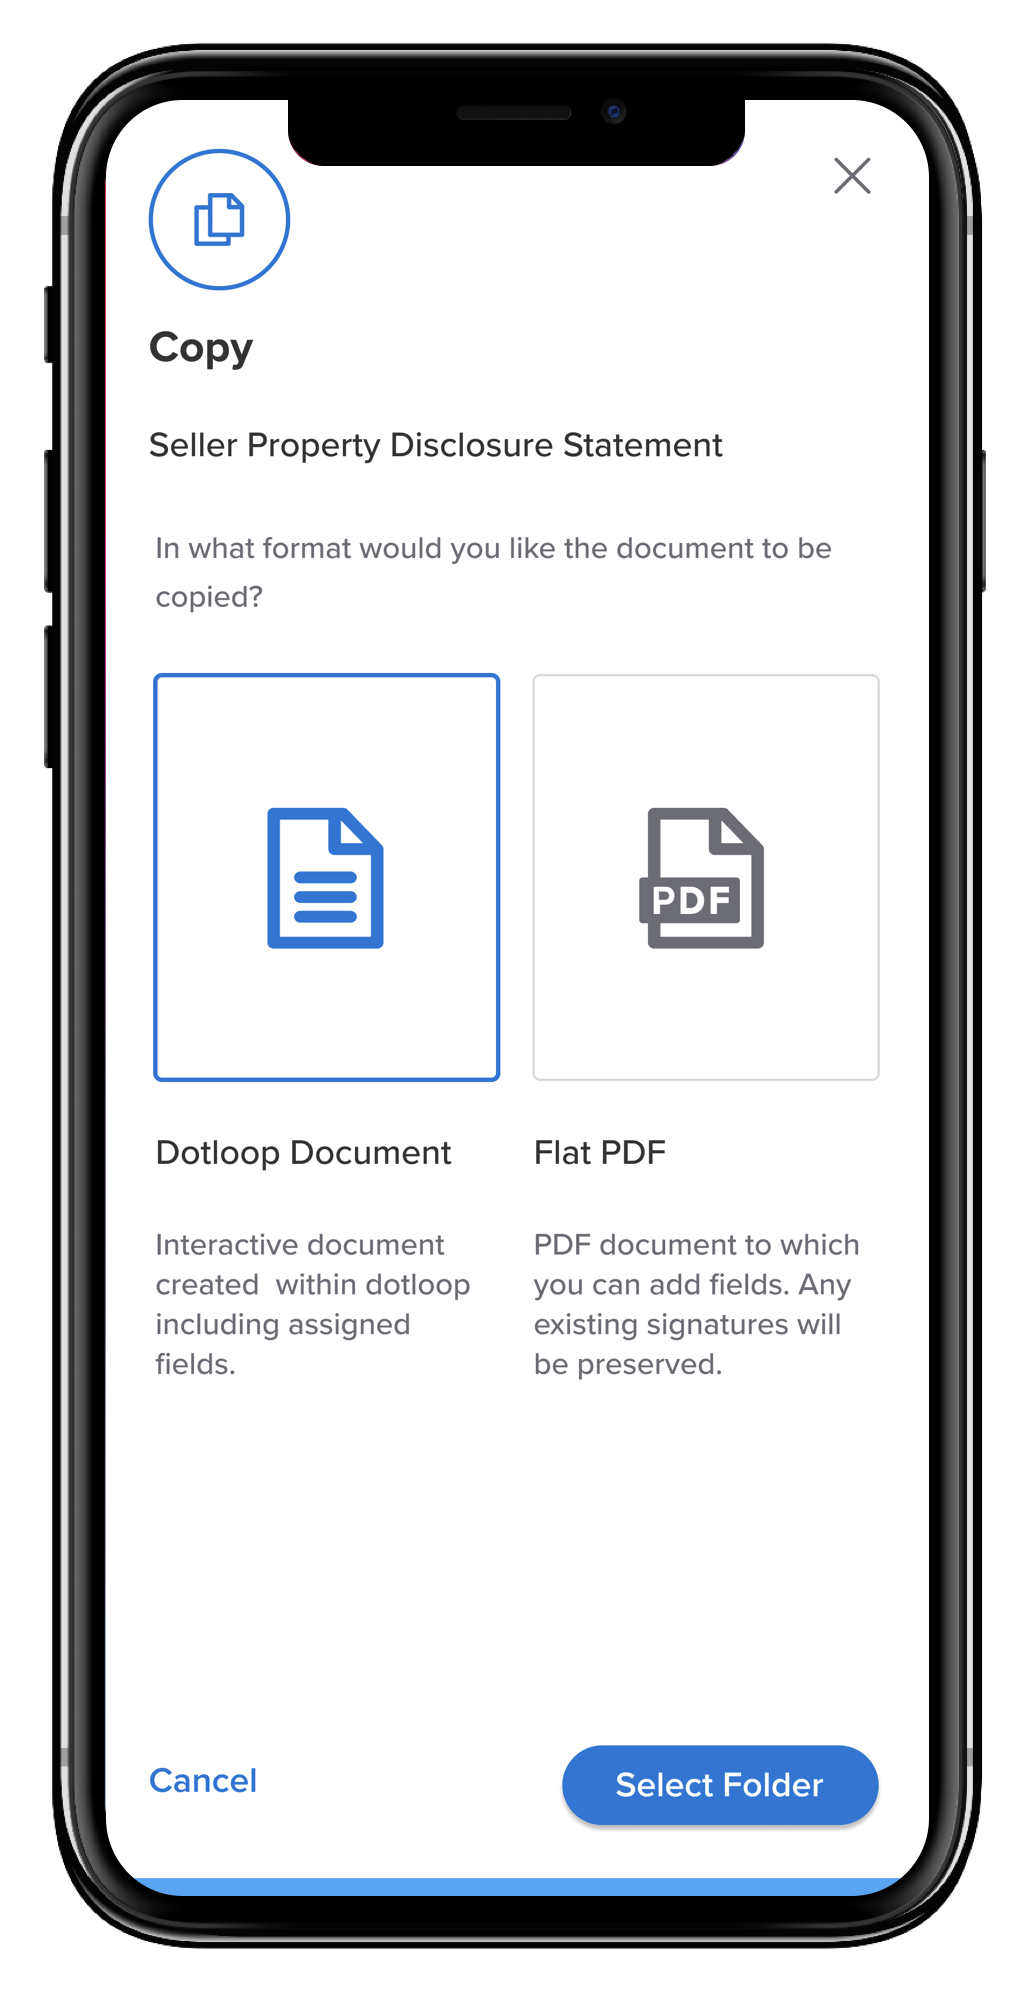 Easily copy documents from your phone